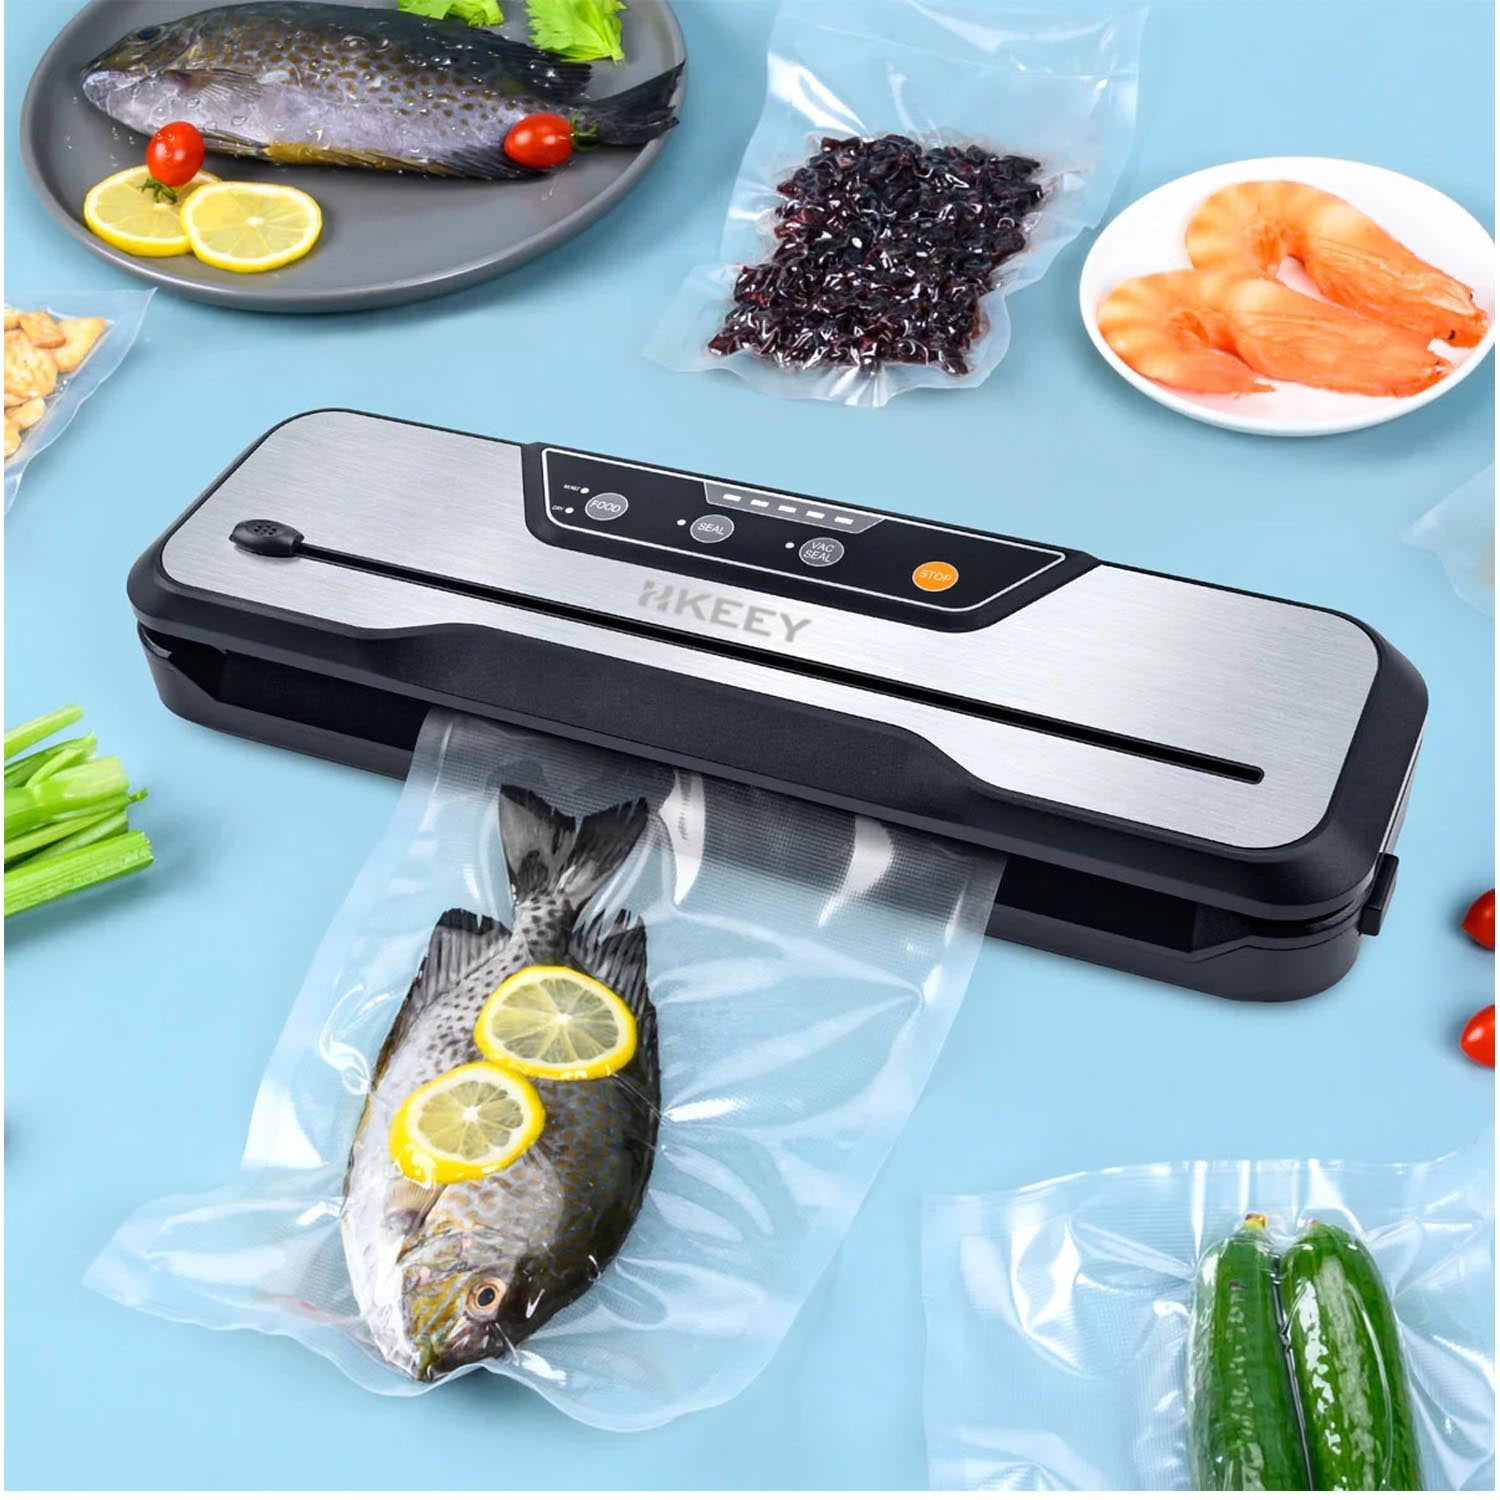 Automatic Food Sealer with Cutter, Dry & Moist Modes, Compact